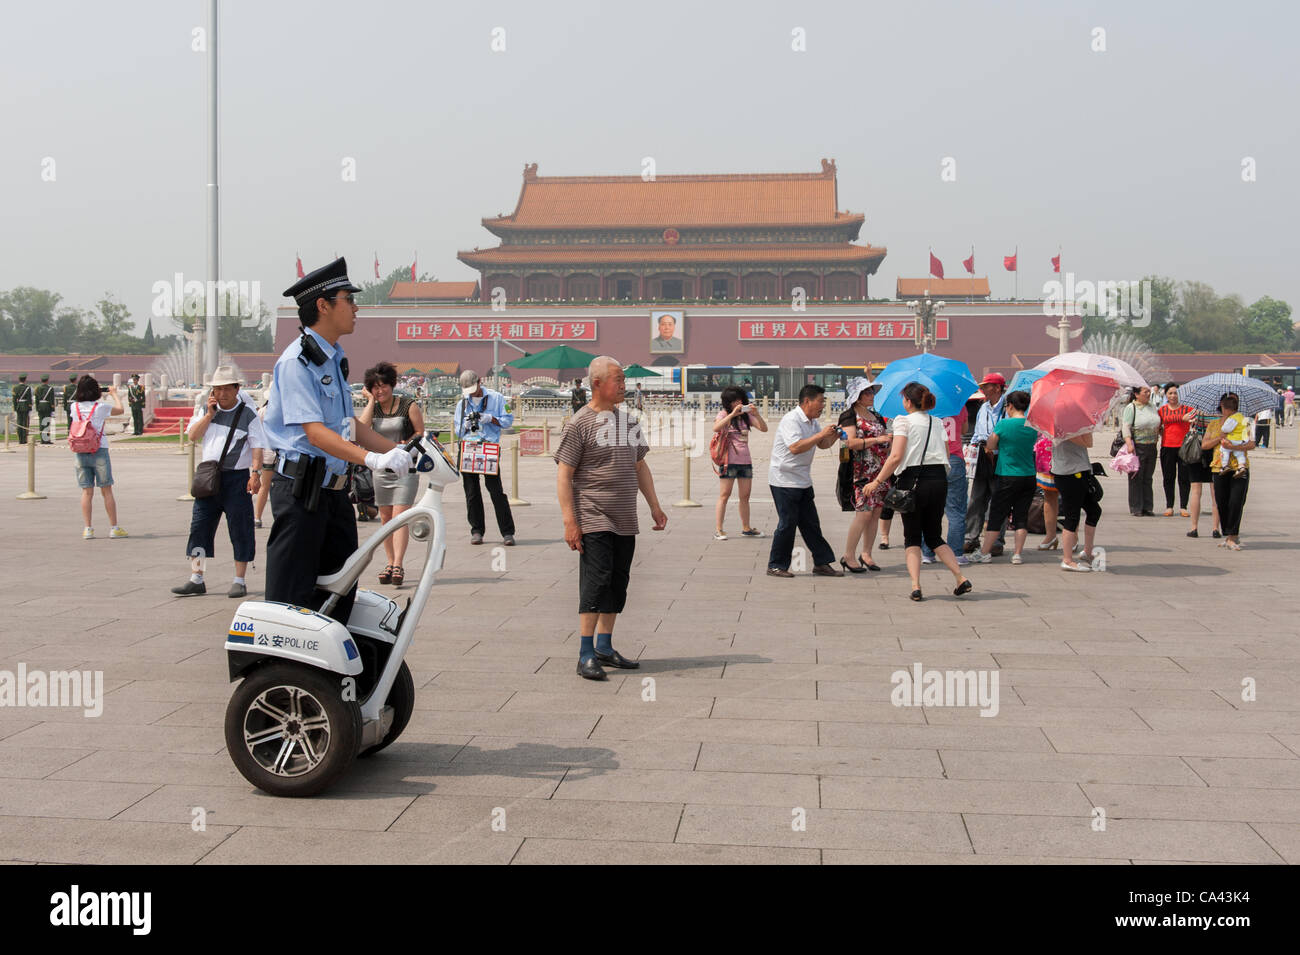 A police officer patrols on Tiananmen Square, Beijing, China on Monday June 4, 2012. June 4th 2012 marks the 23rd anniversary of the military crackdown on students protests at Tiananmen Square in 1989. Stock Photo